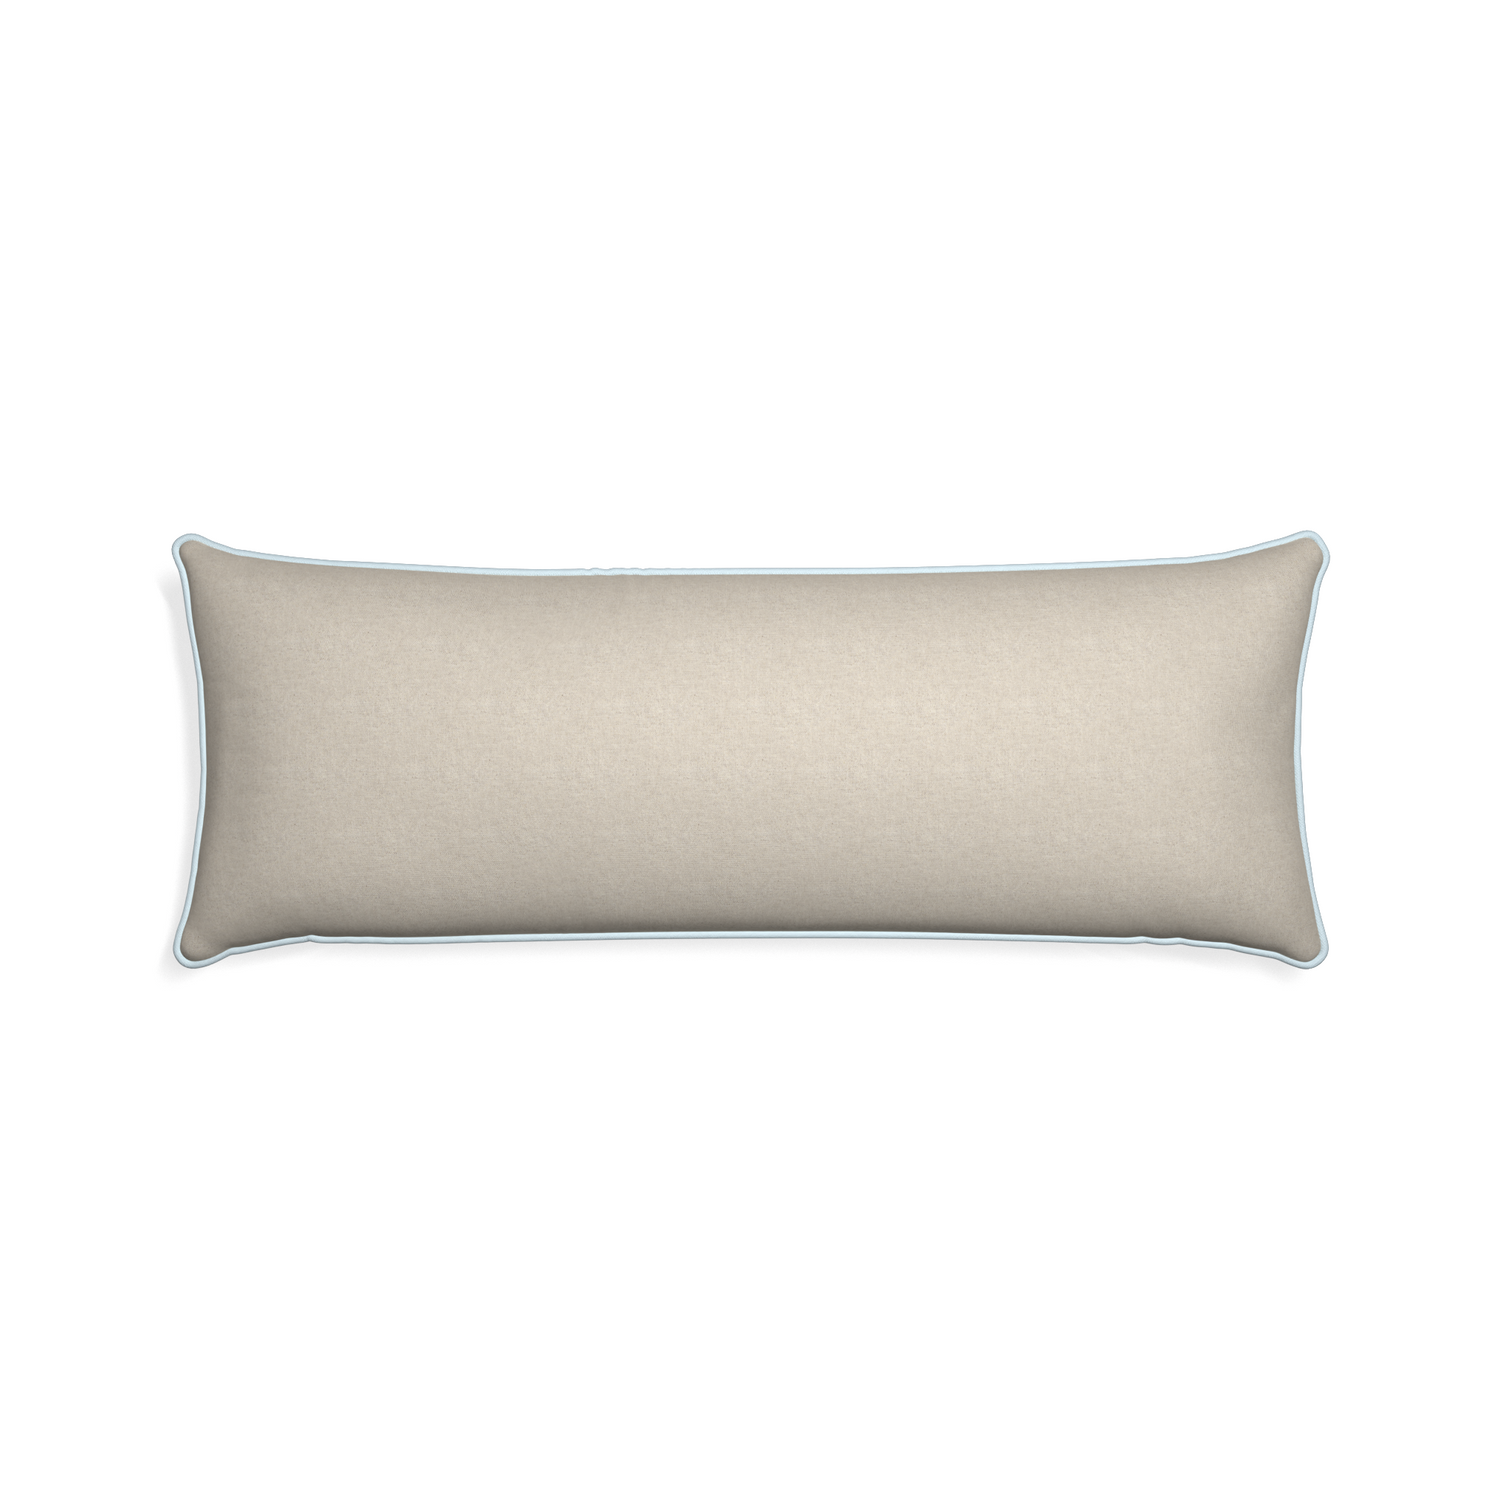 Xl-lumbar oat custom light brownpillow with powder piping on white background